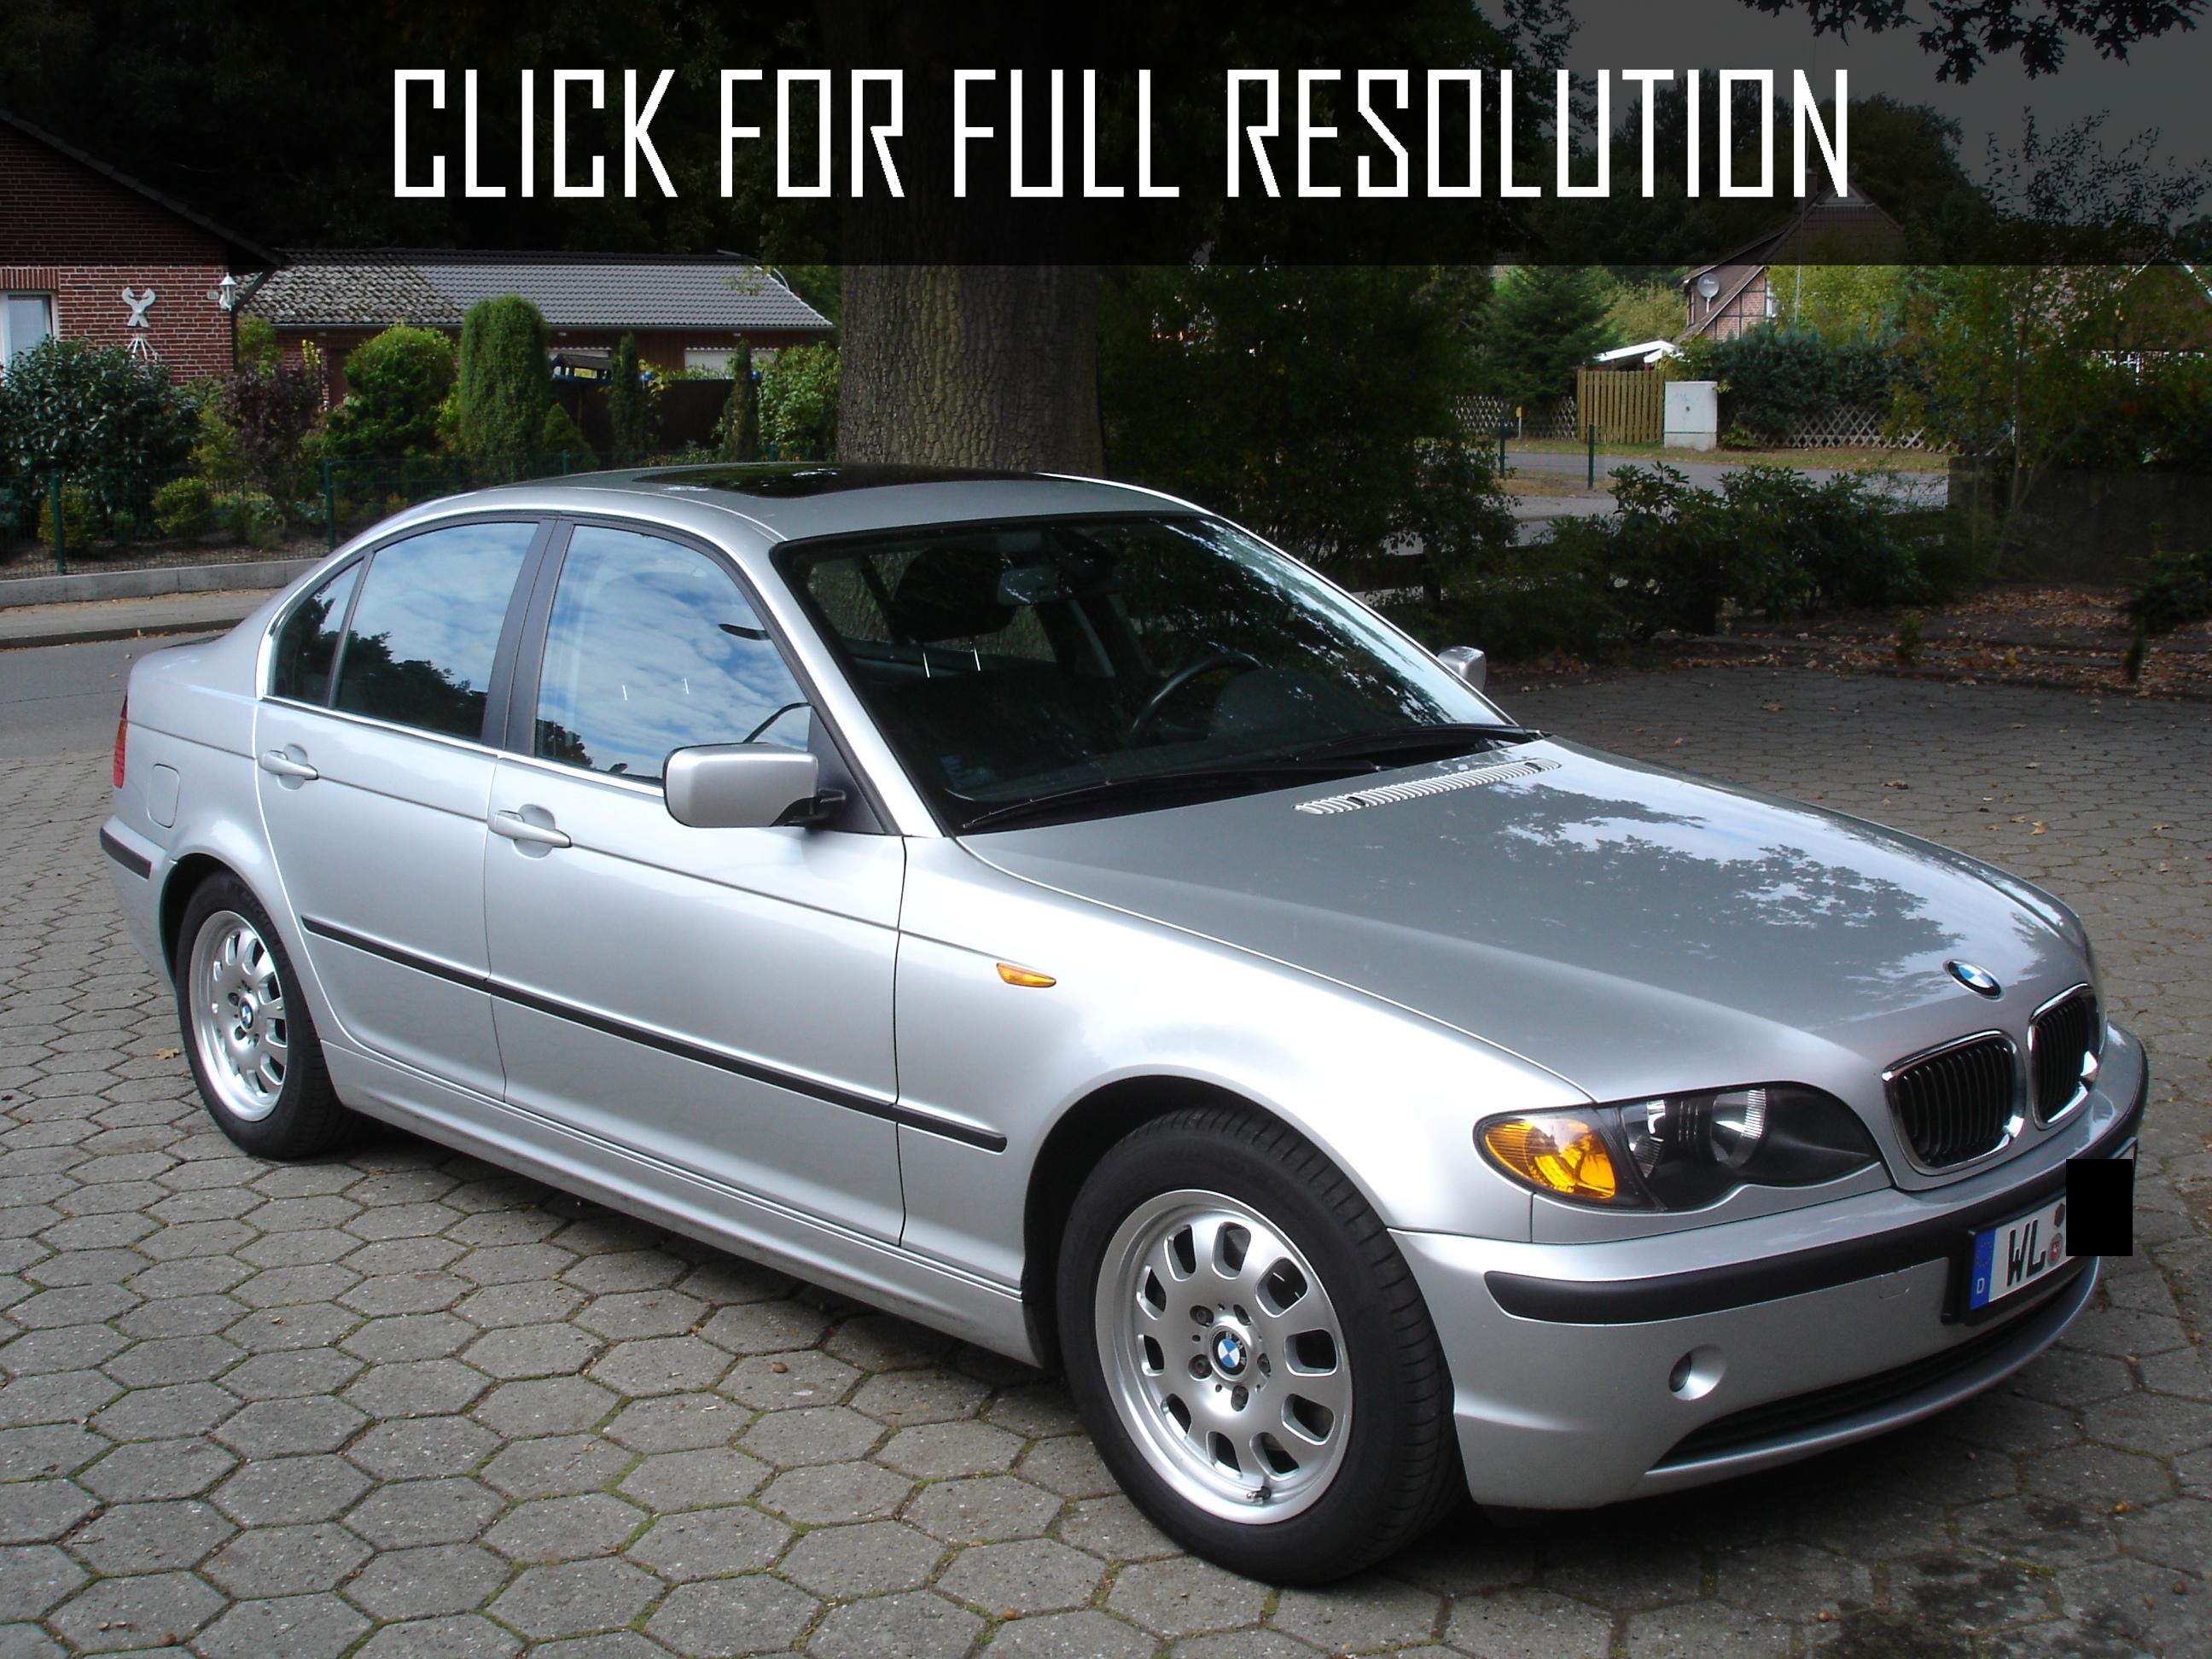 2003 Bmw E46 325i news, reviews, msrp, ratings with